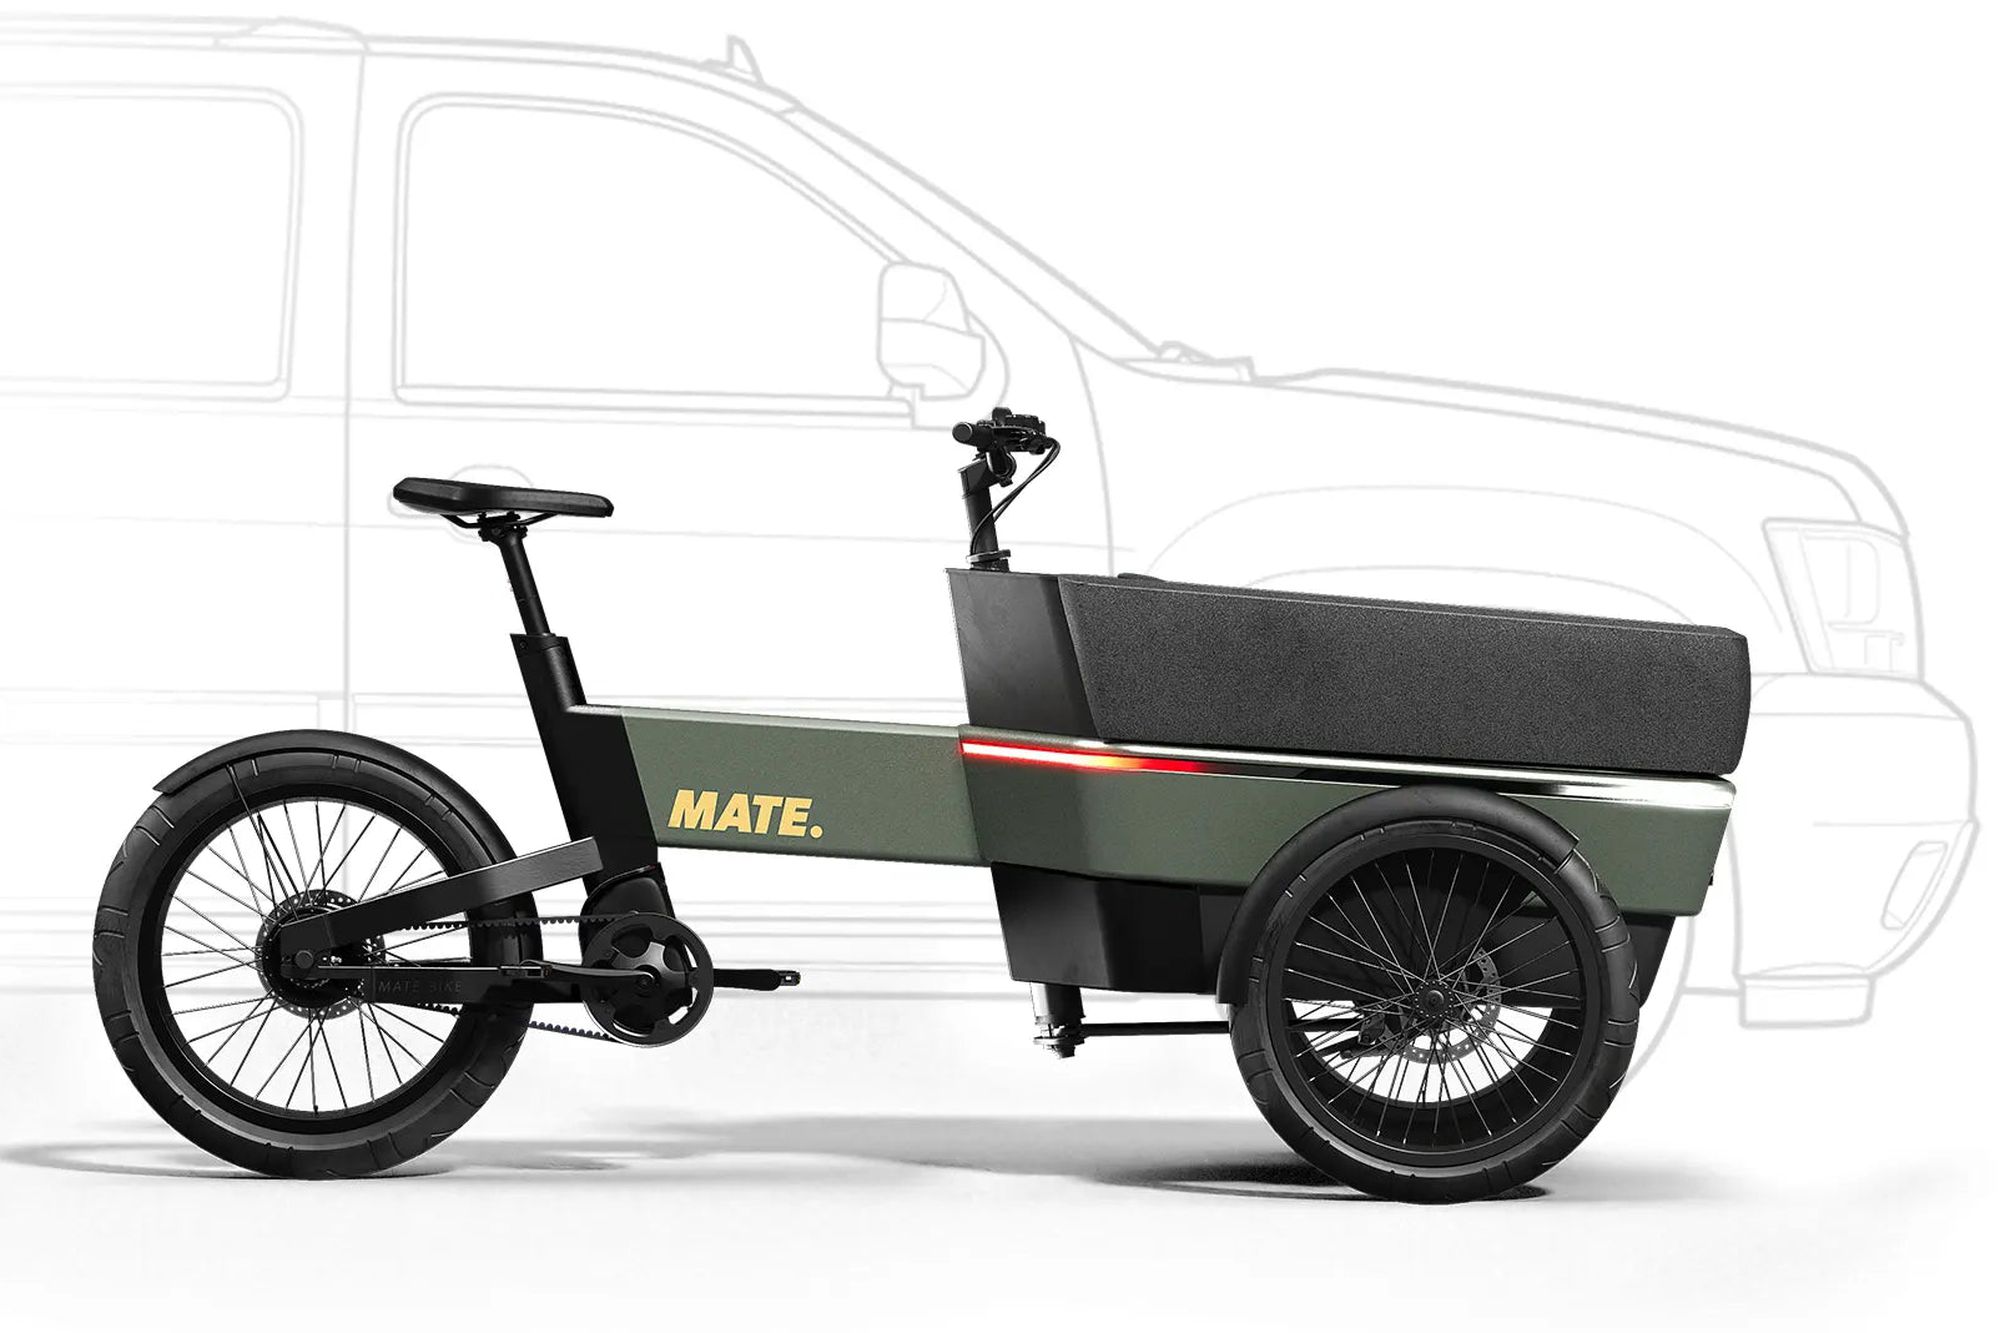 bejdsemiddel månedlige fjols The Mate SUV electric cargo bike is coming to replace your expensive car -  The Verge